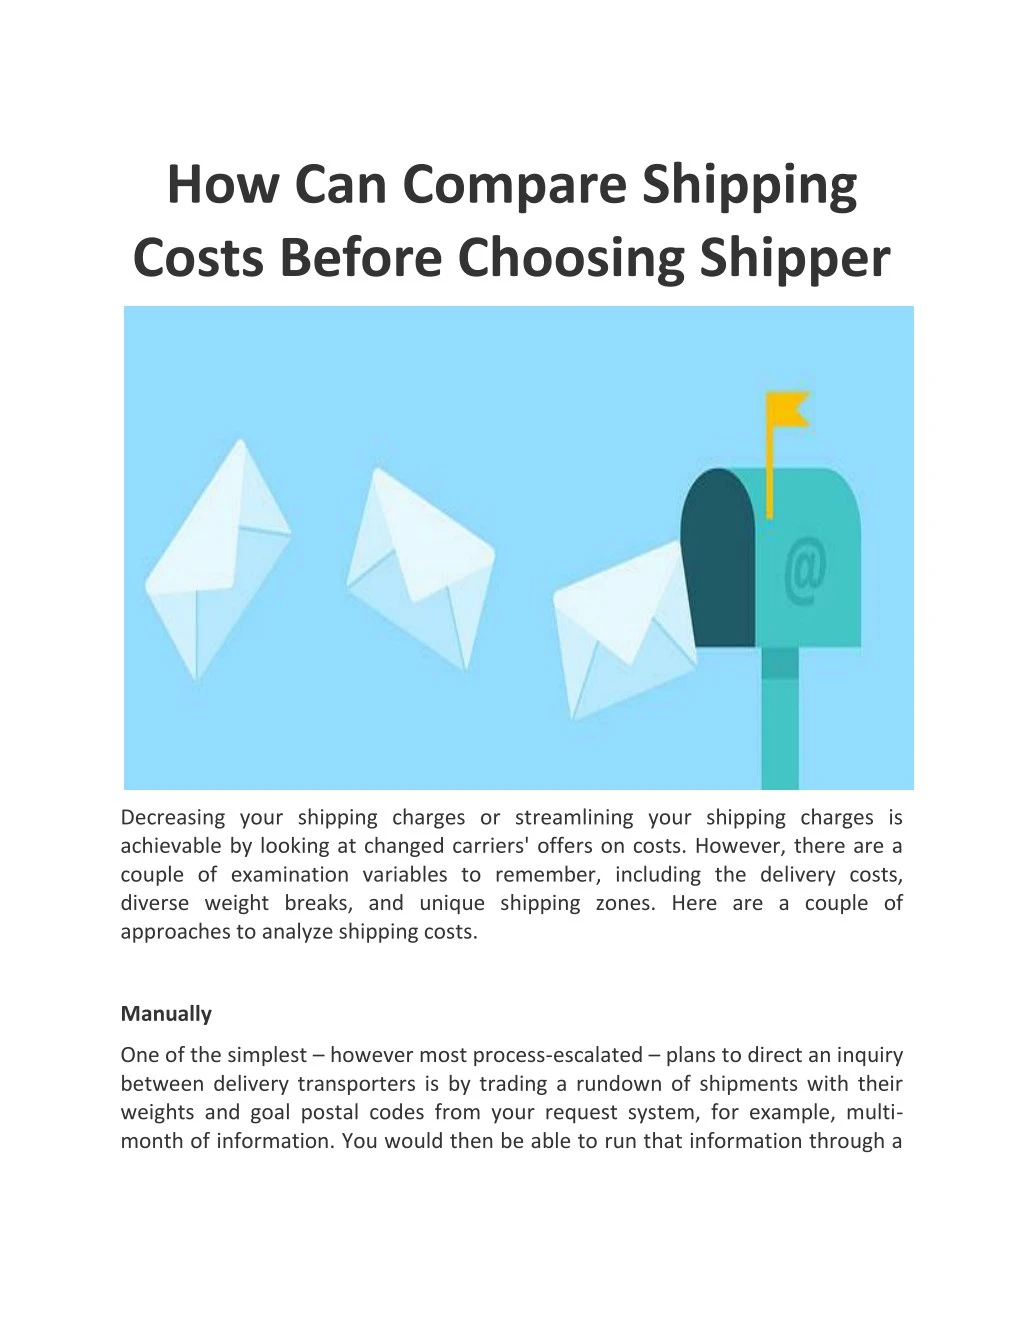 how can compare shipping costs before choosing